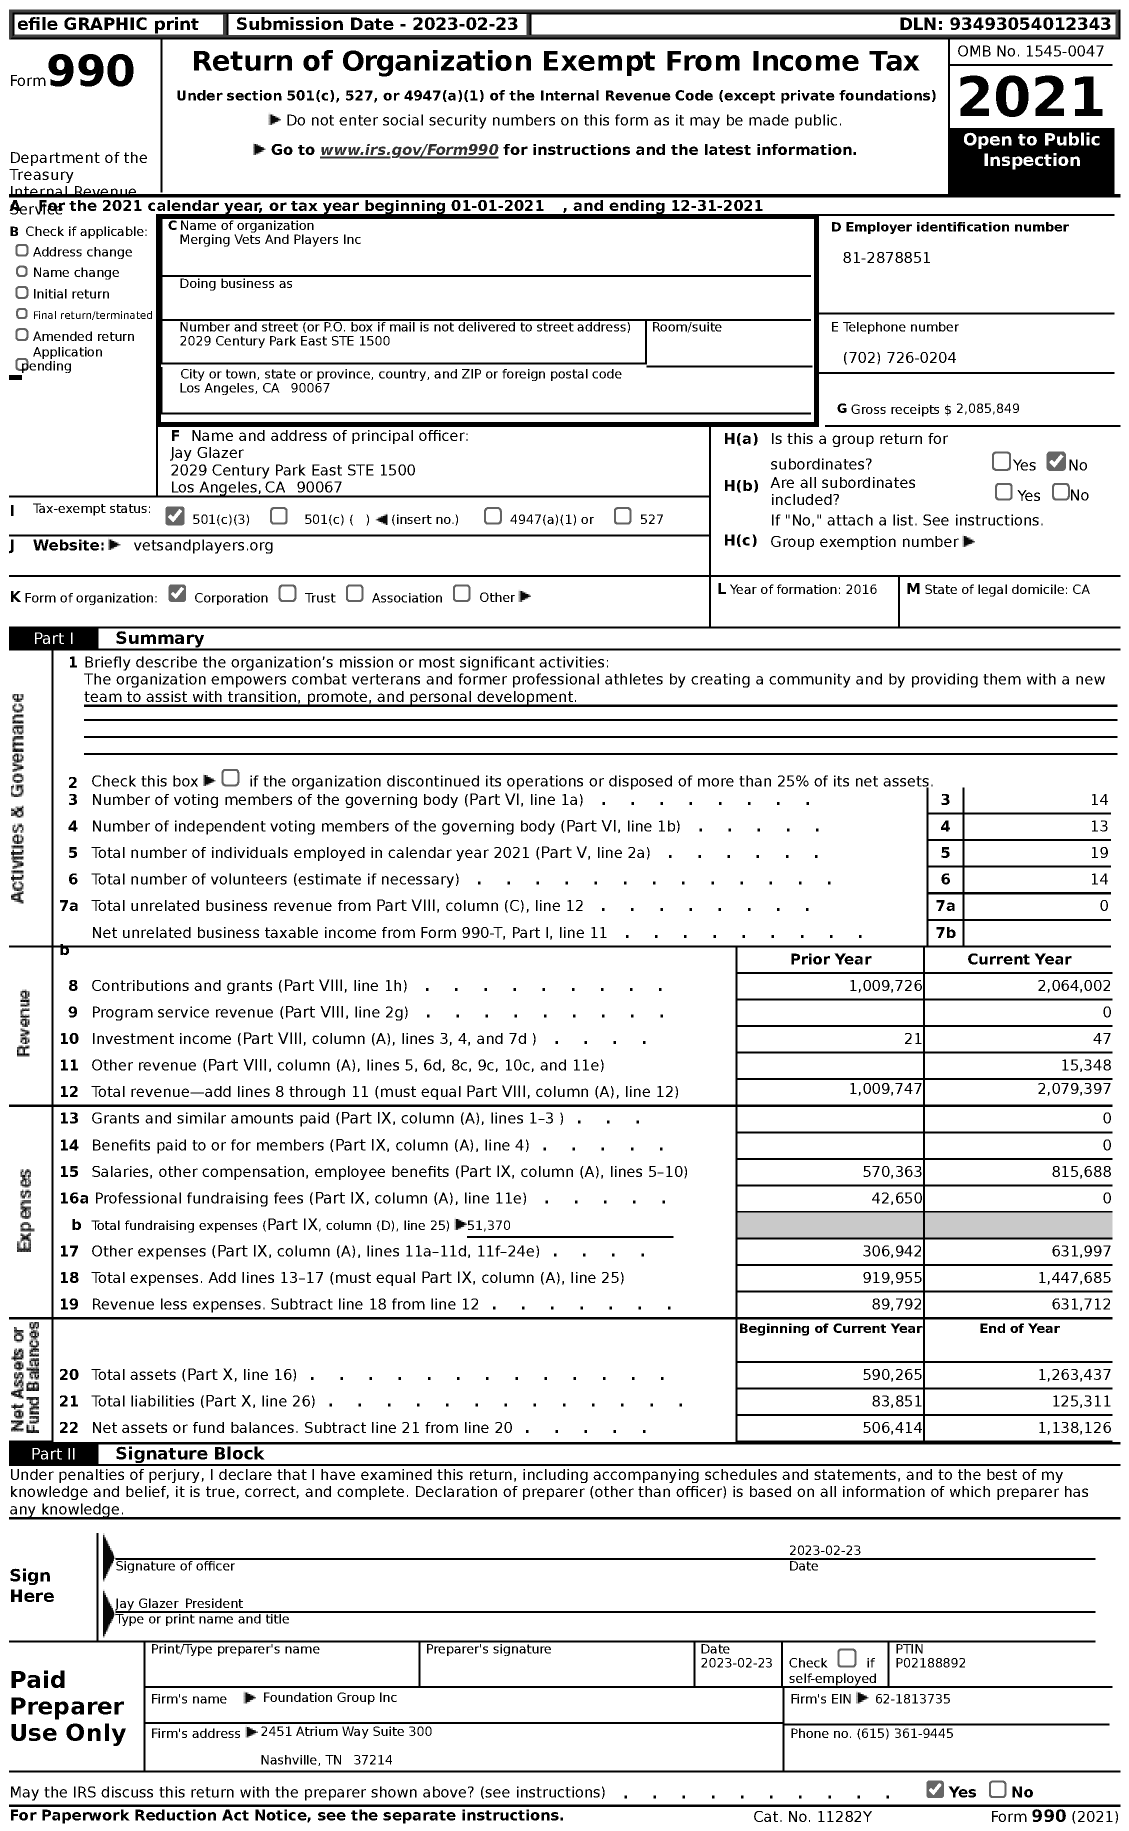 Image of first page of 2021 Form 990 for Merging Vets And Players